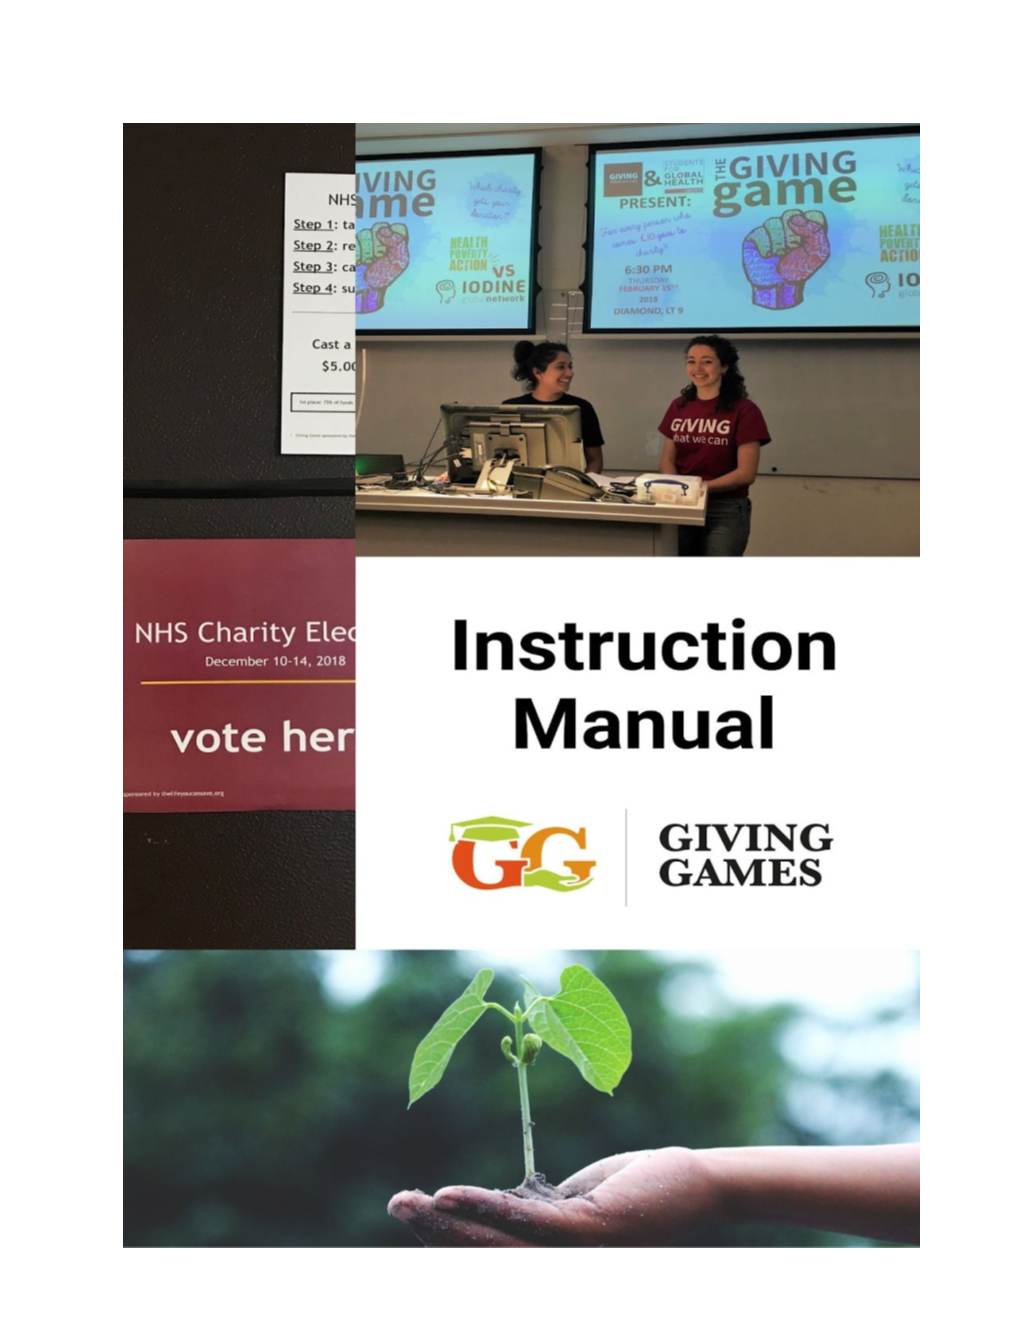 Instruction-Manual-For-Giving-Games